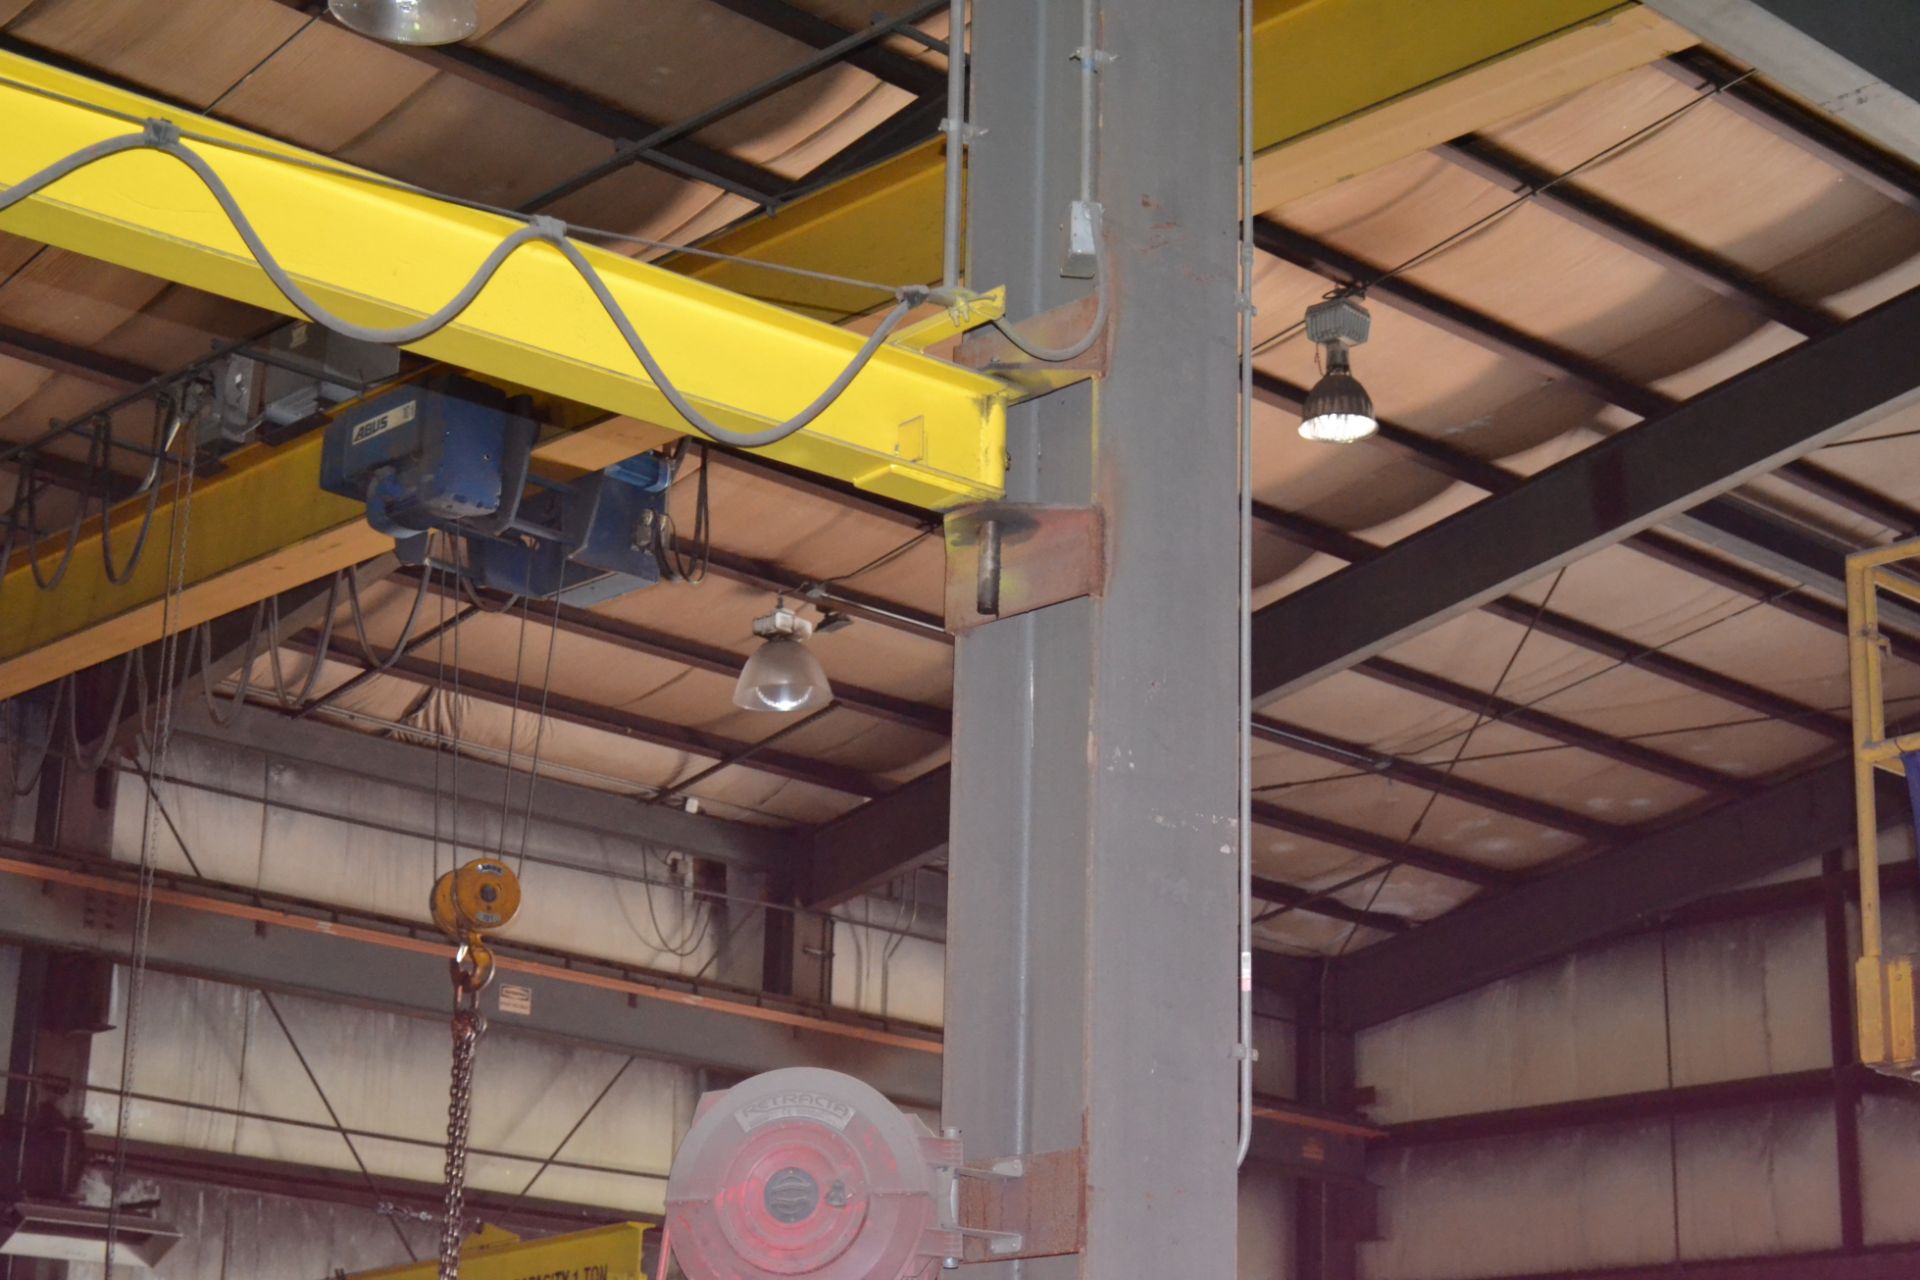 1-Ton Post Mounted Jib Crane, Approximately 15', With 1-Ton Roughneck Electric Hoist - Image 4 of 5